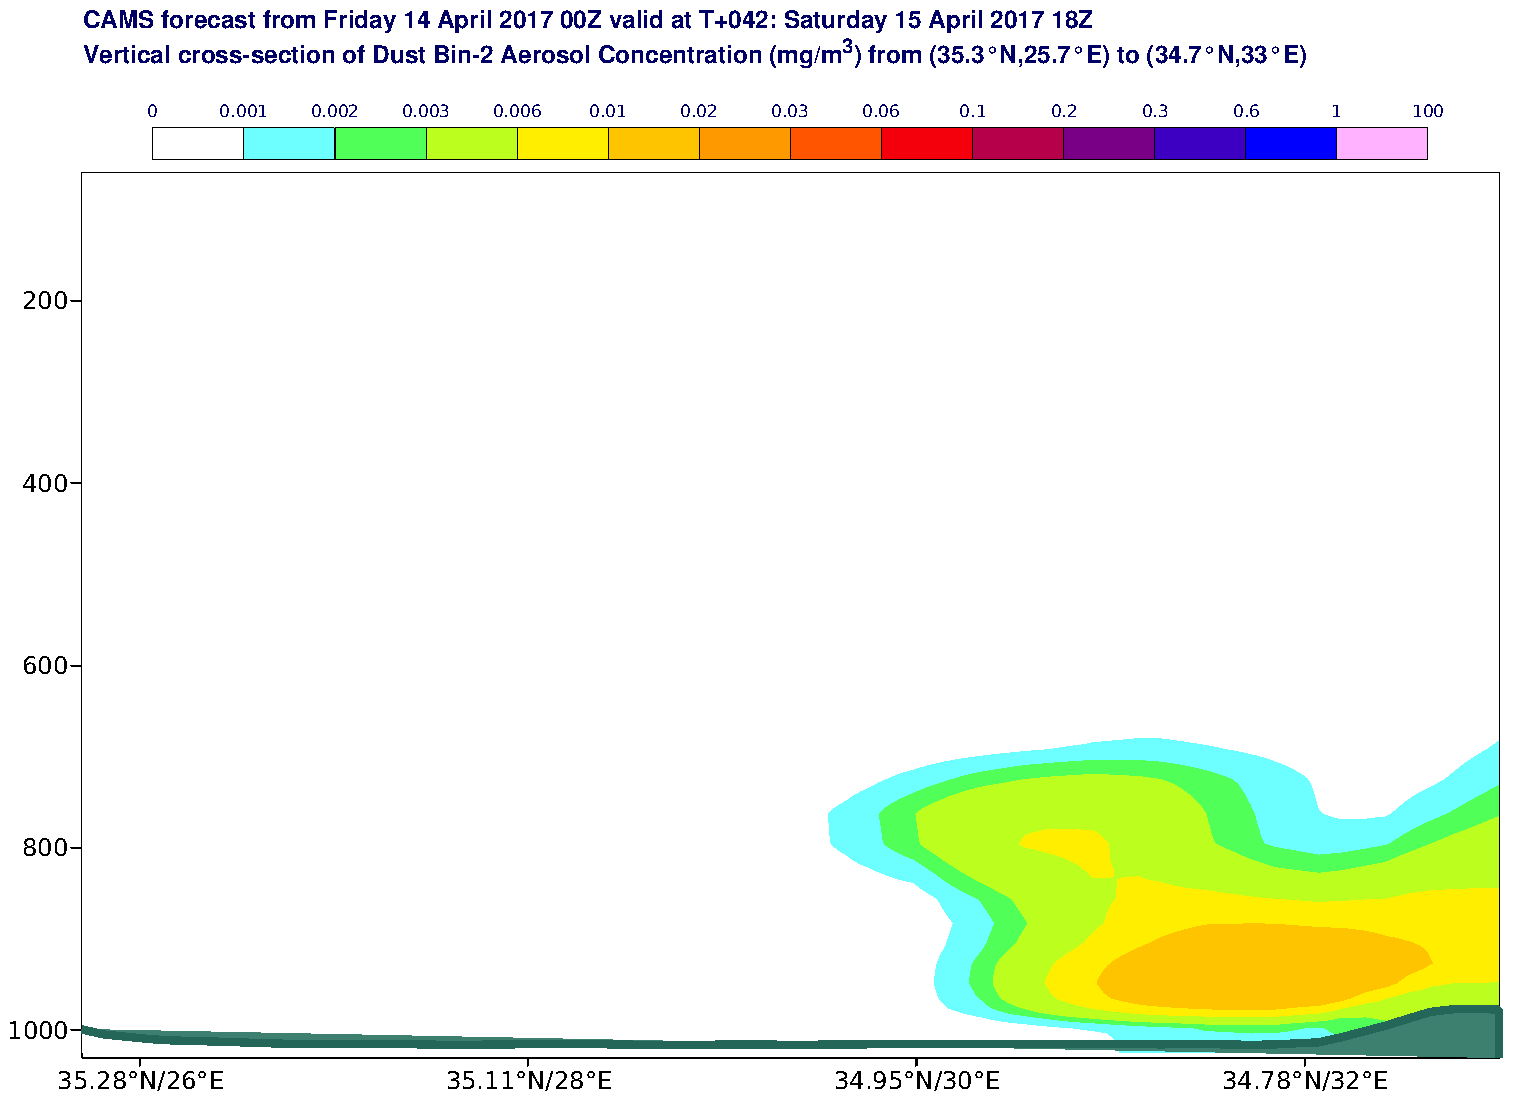 Vertical cross-section of Dust Bin-2 Aerosol Concentration (mg/m3) valid at T42 - 2017-04-15 18:00